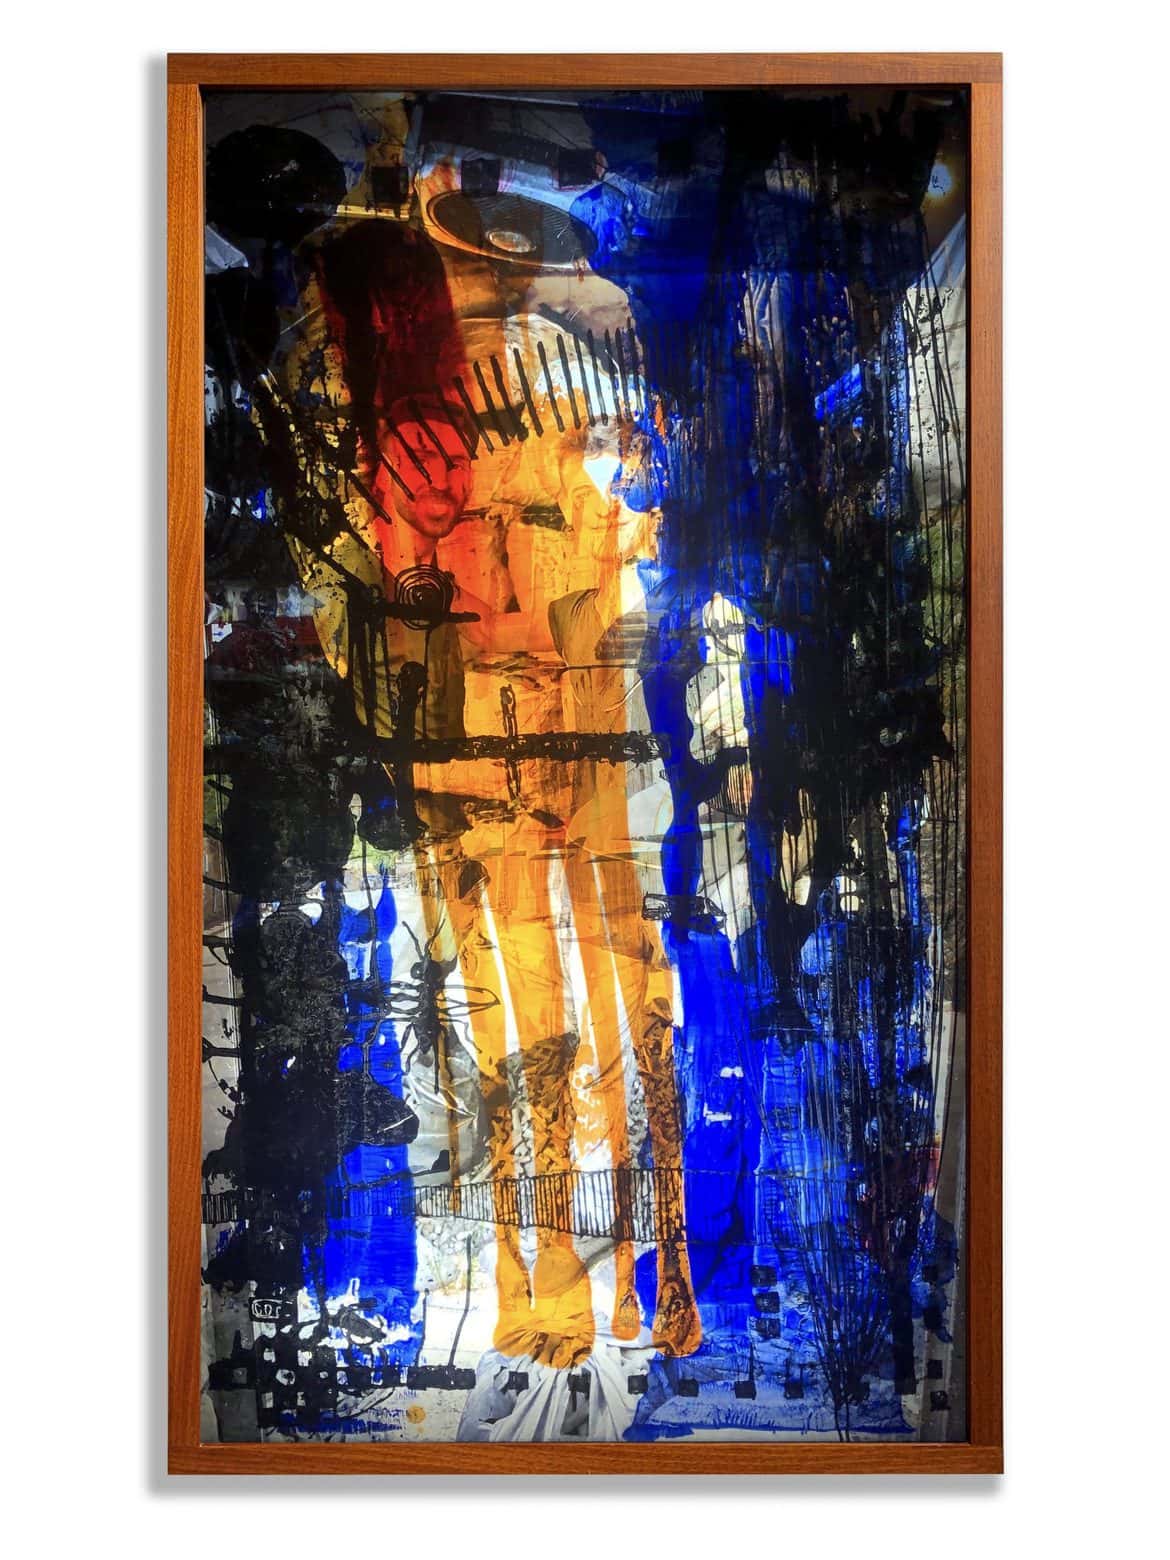 'Corona Jihad’, 2020, mixed media on translucent film with face-mounted photographic image on acrylic in framed light box,140 x 80 x 11 cm